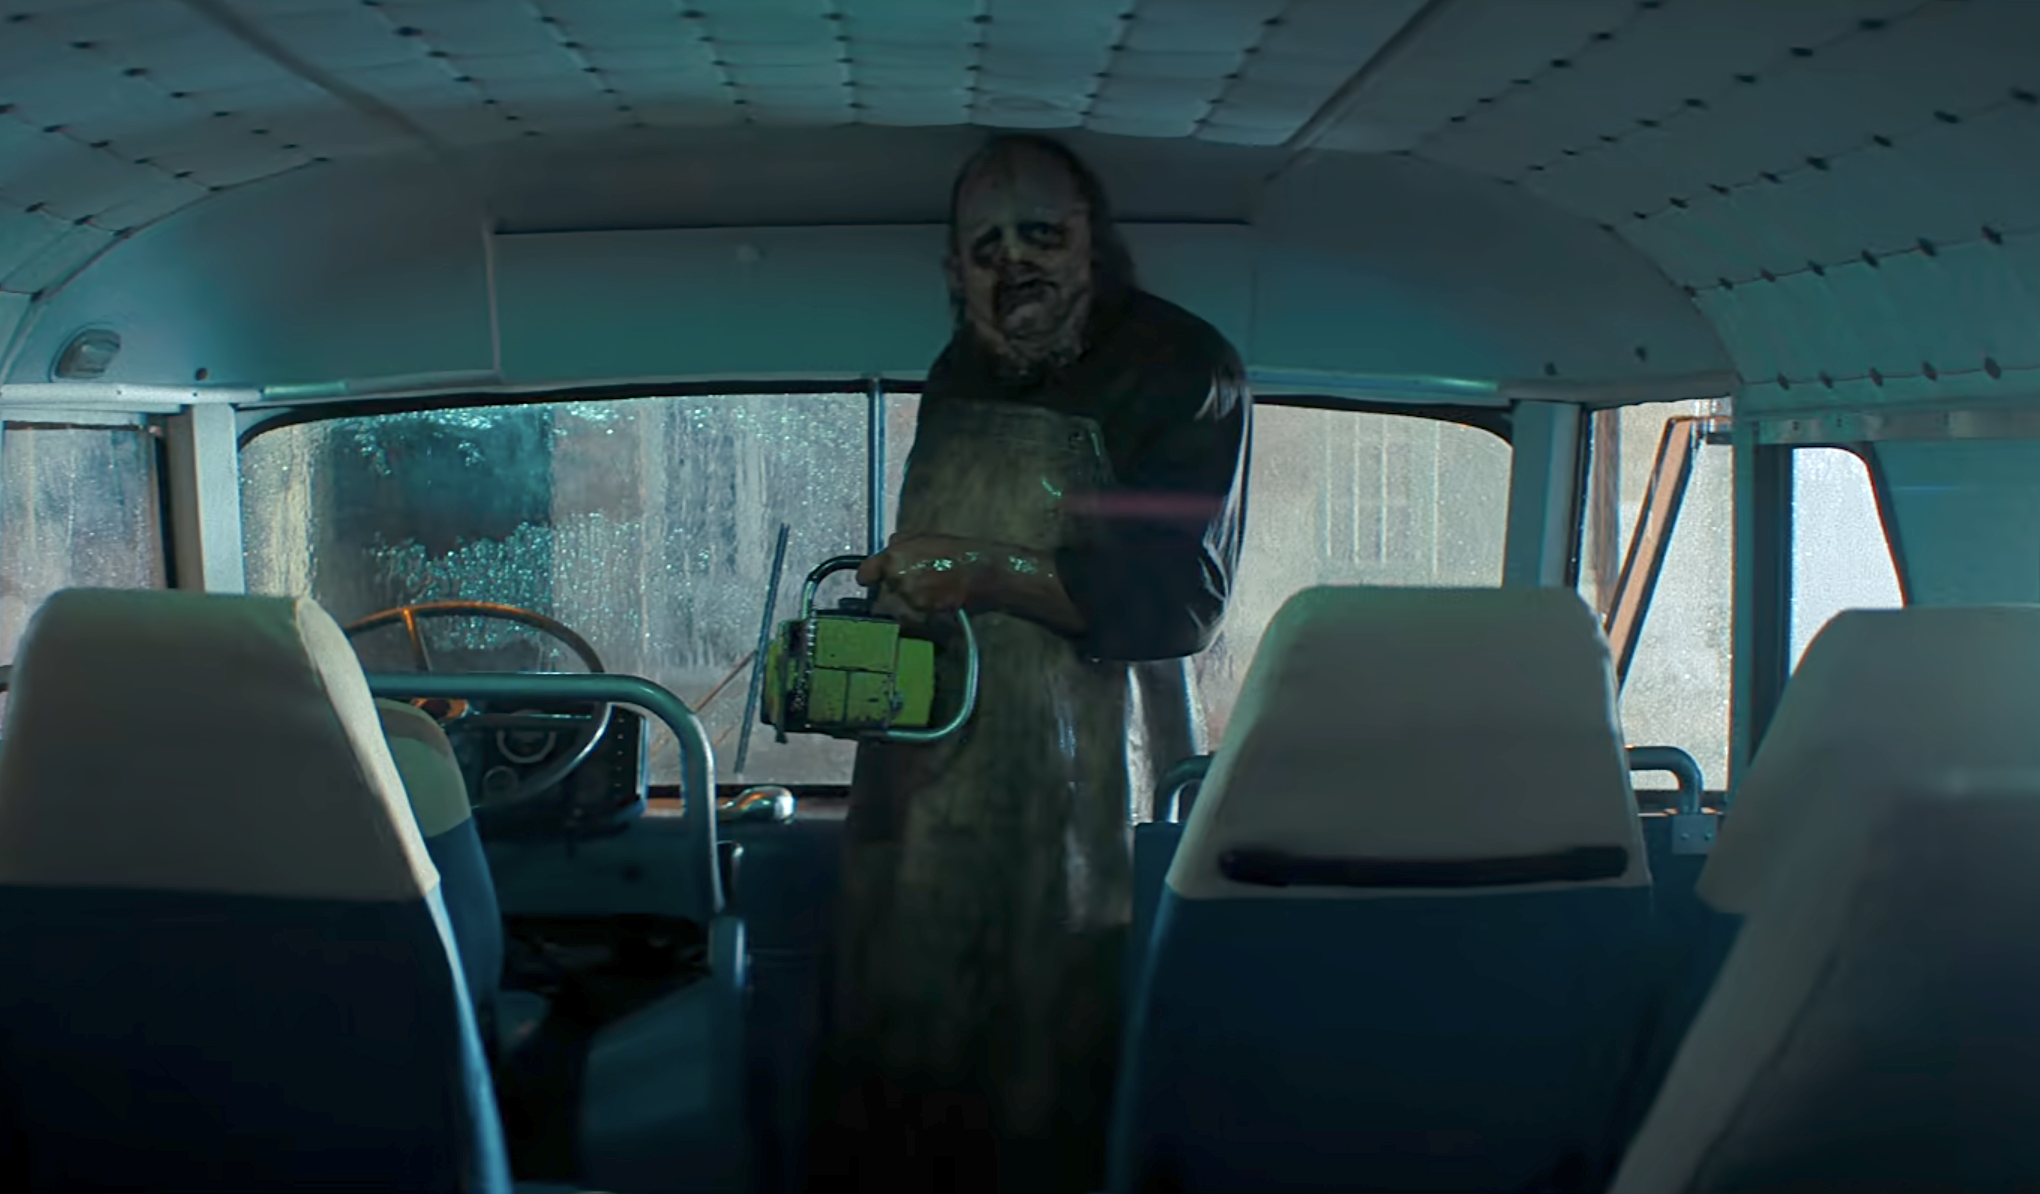 Leatherface standing on a bus with his chainsaw